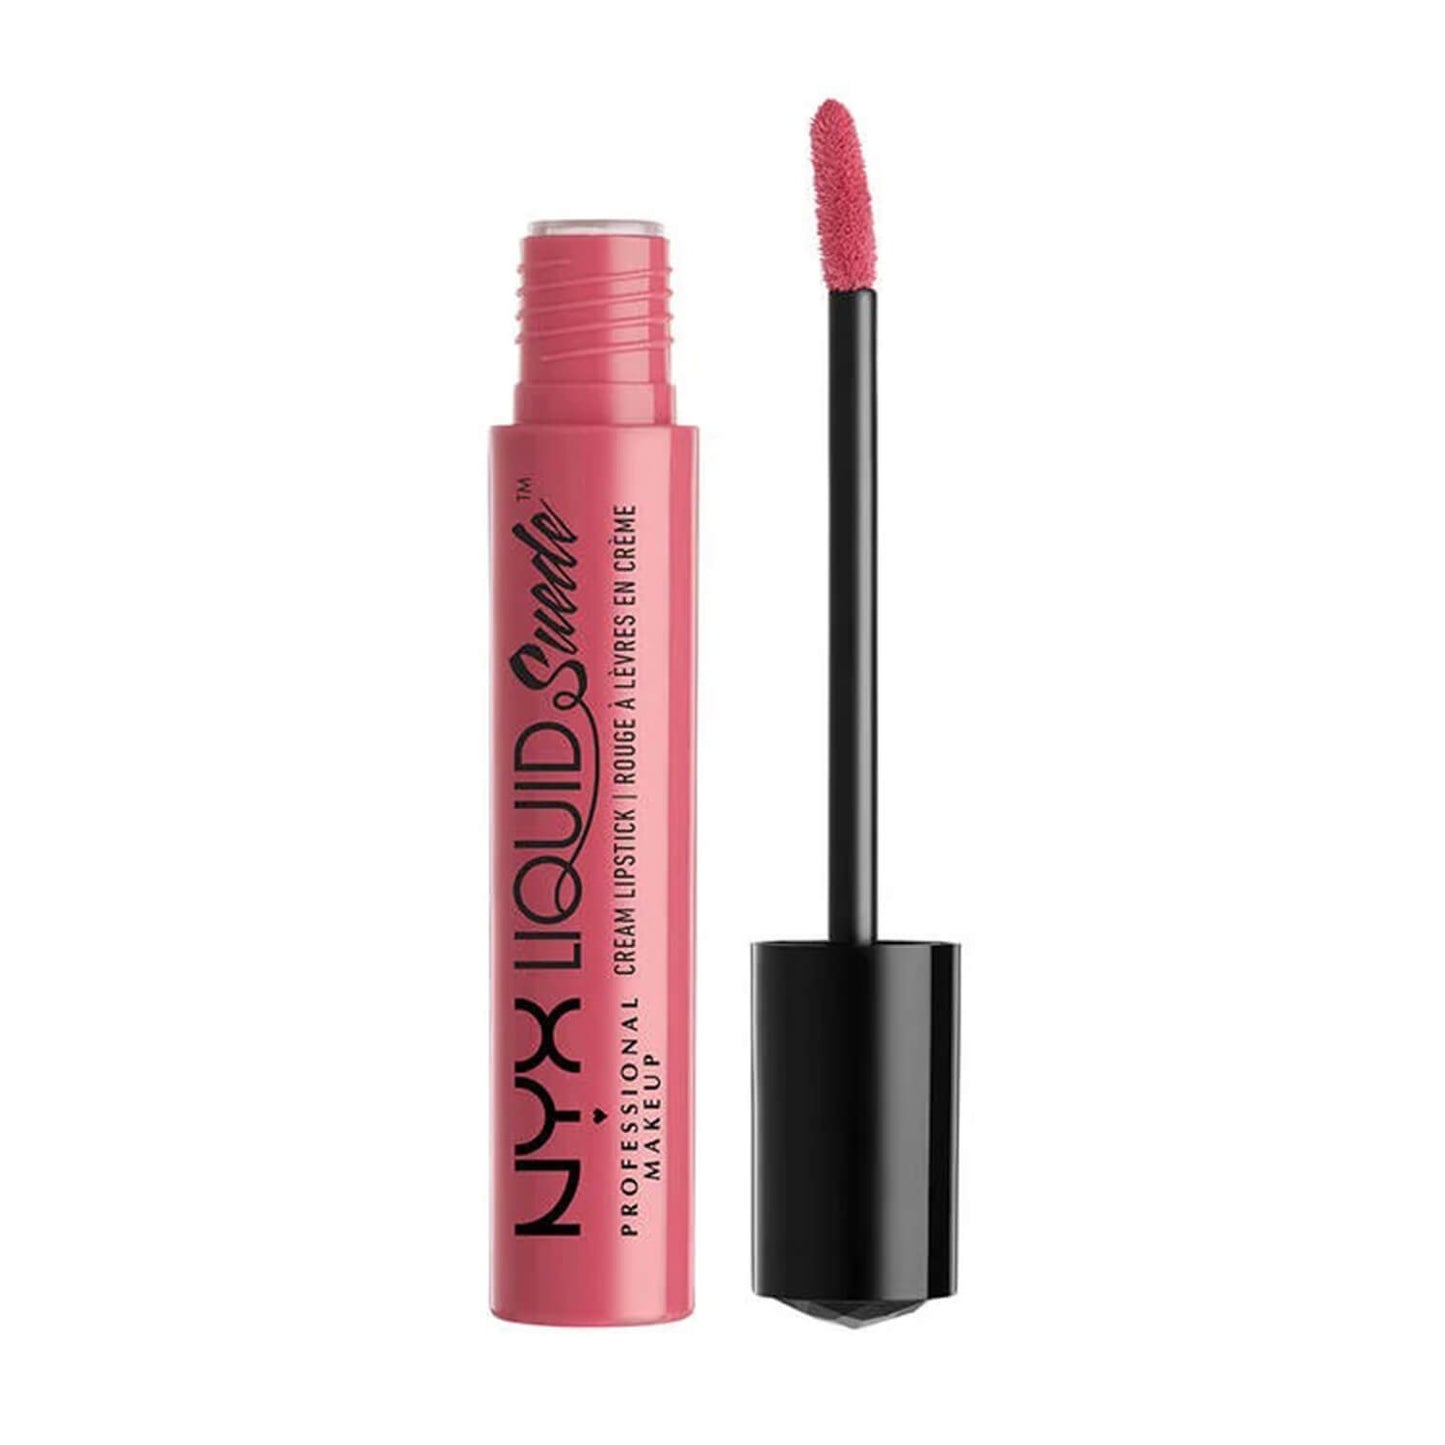 Shop NYX Liquid Suede Cream Lipstick available at Heygirl.pk for delivery in Pakistan